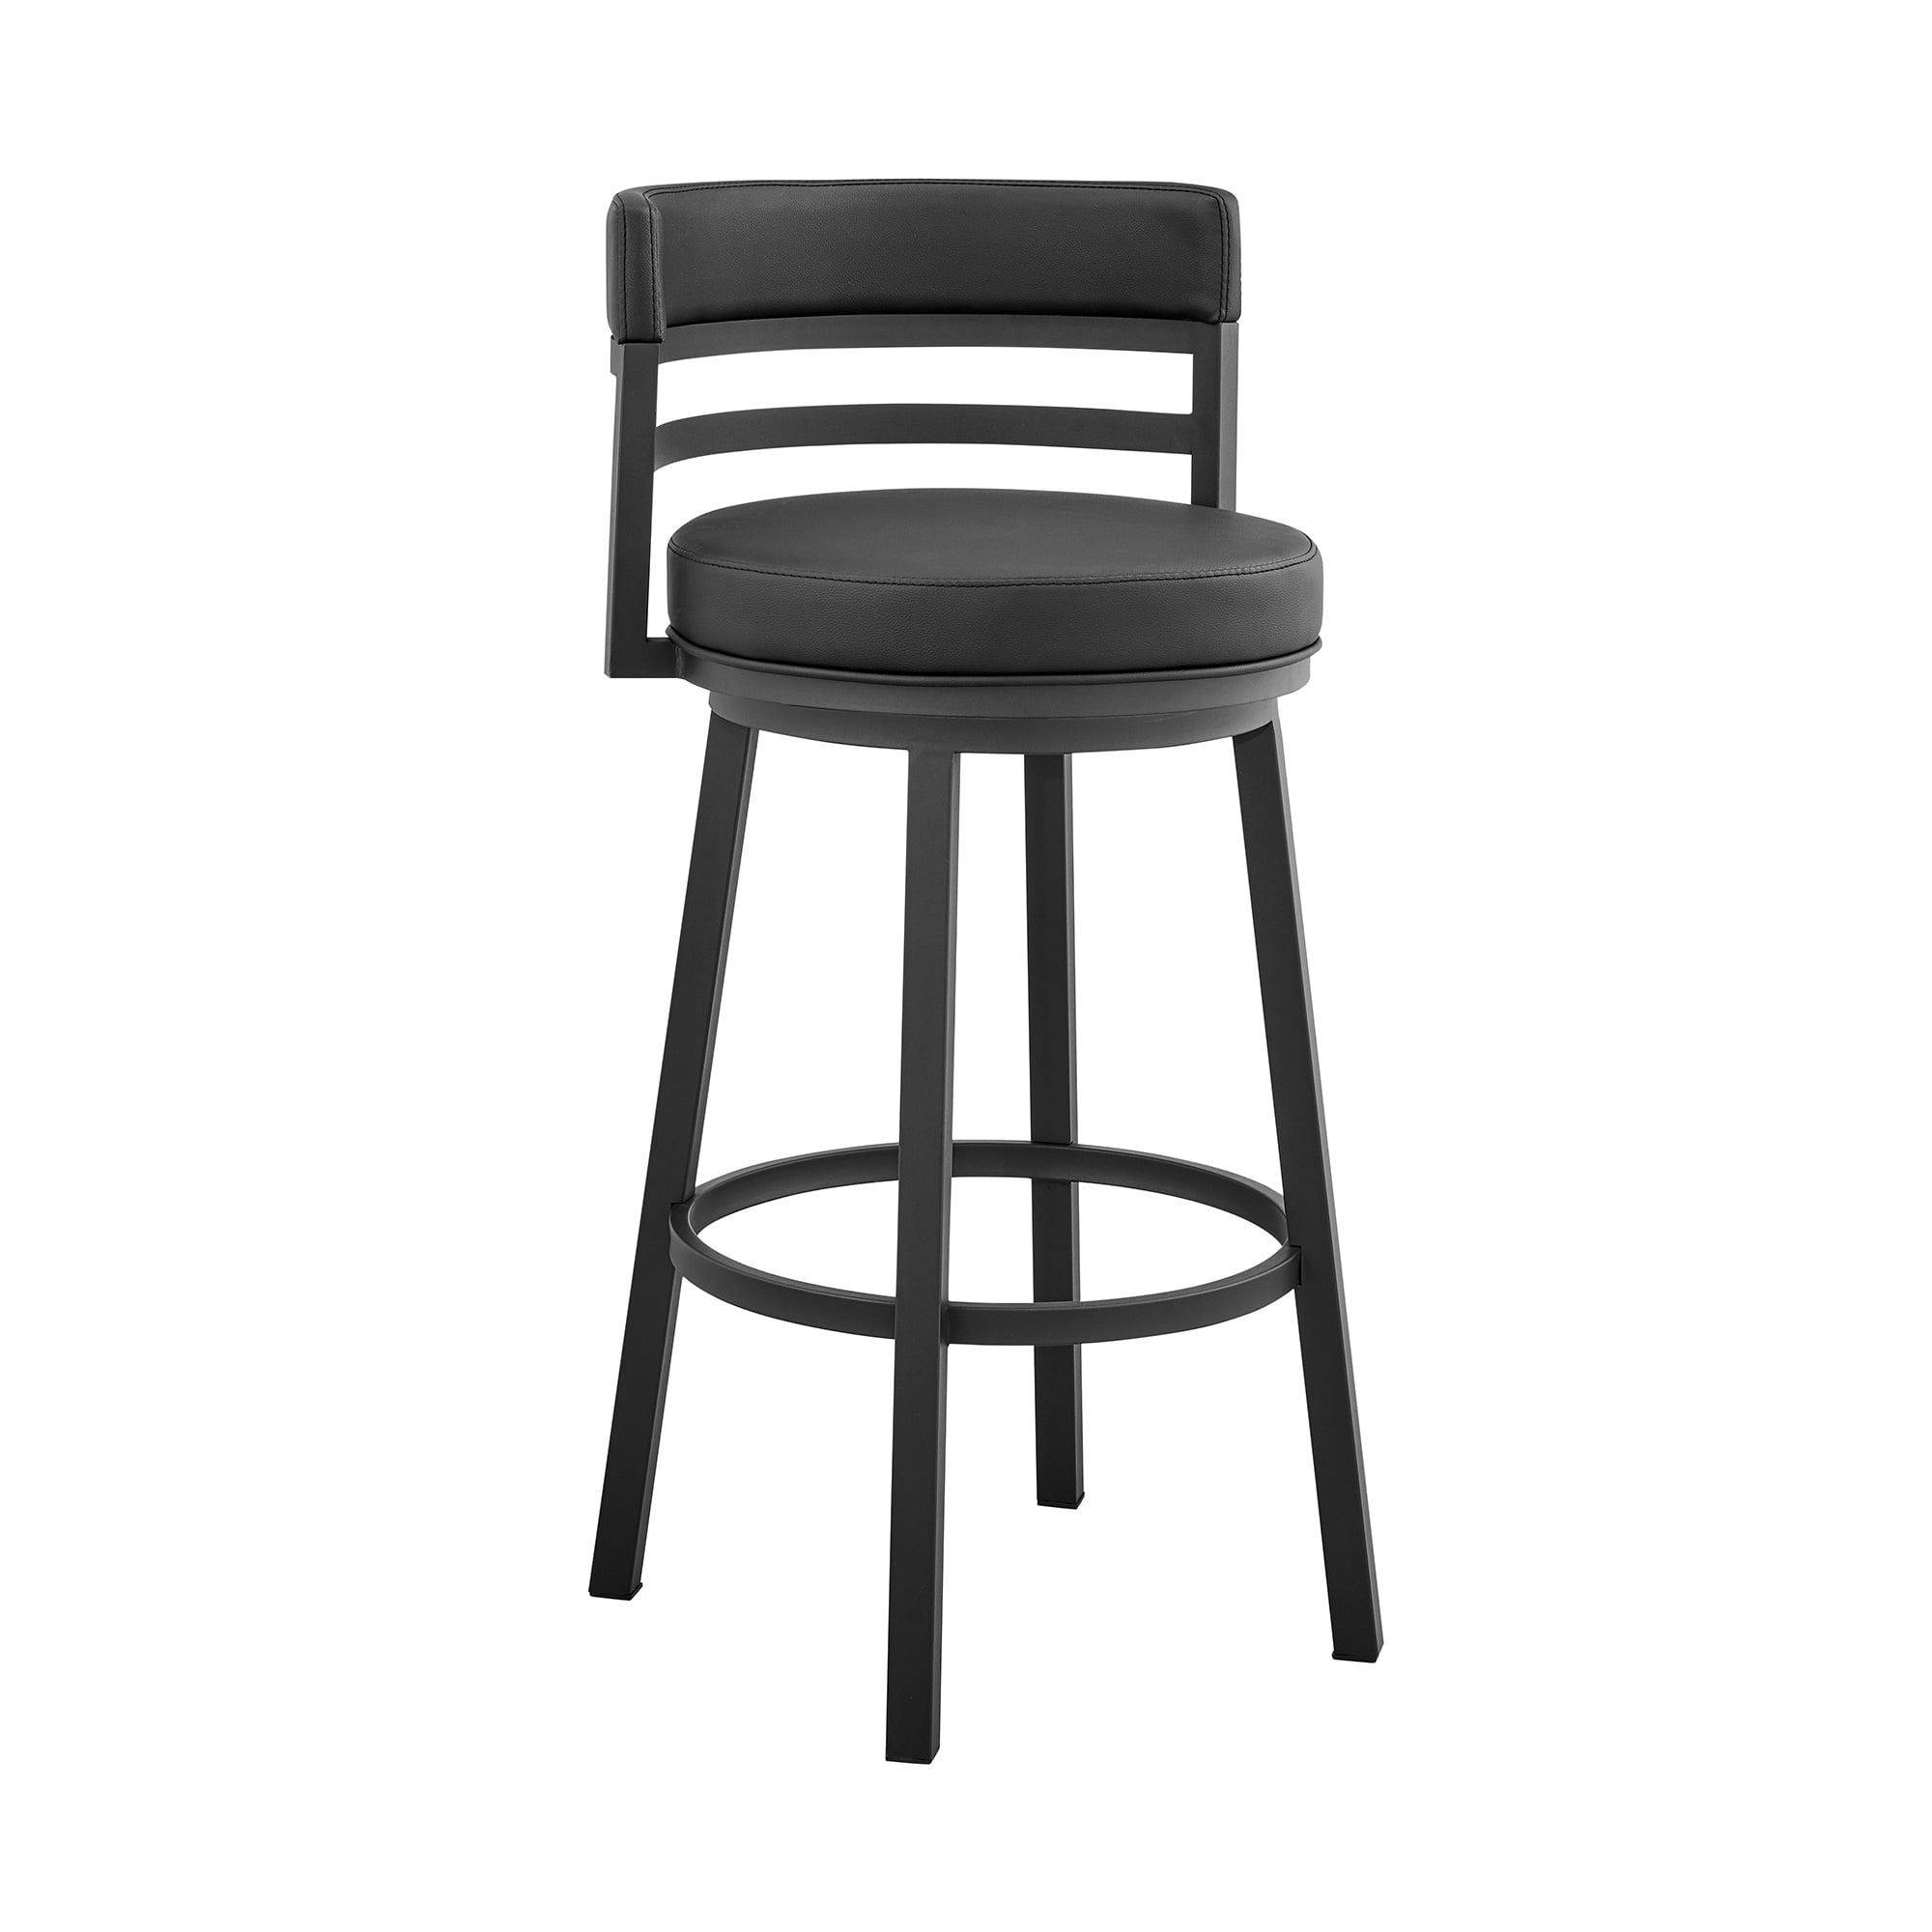 Picture of Armen Living 840254335011 30 in. Titana Bar Height Swivel Black Faux Leather & Metal Bar Stool